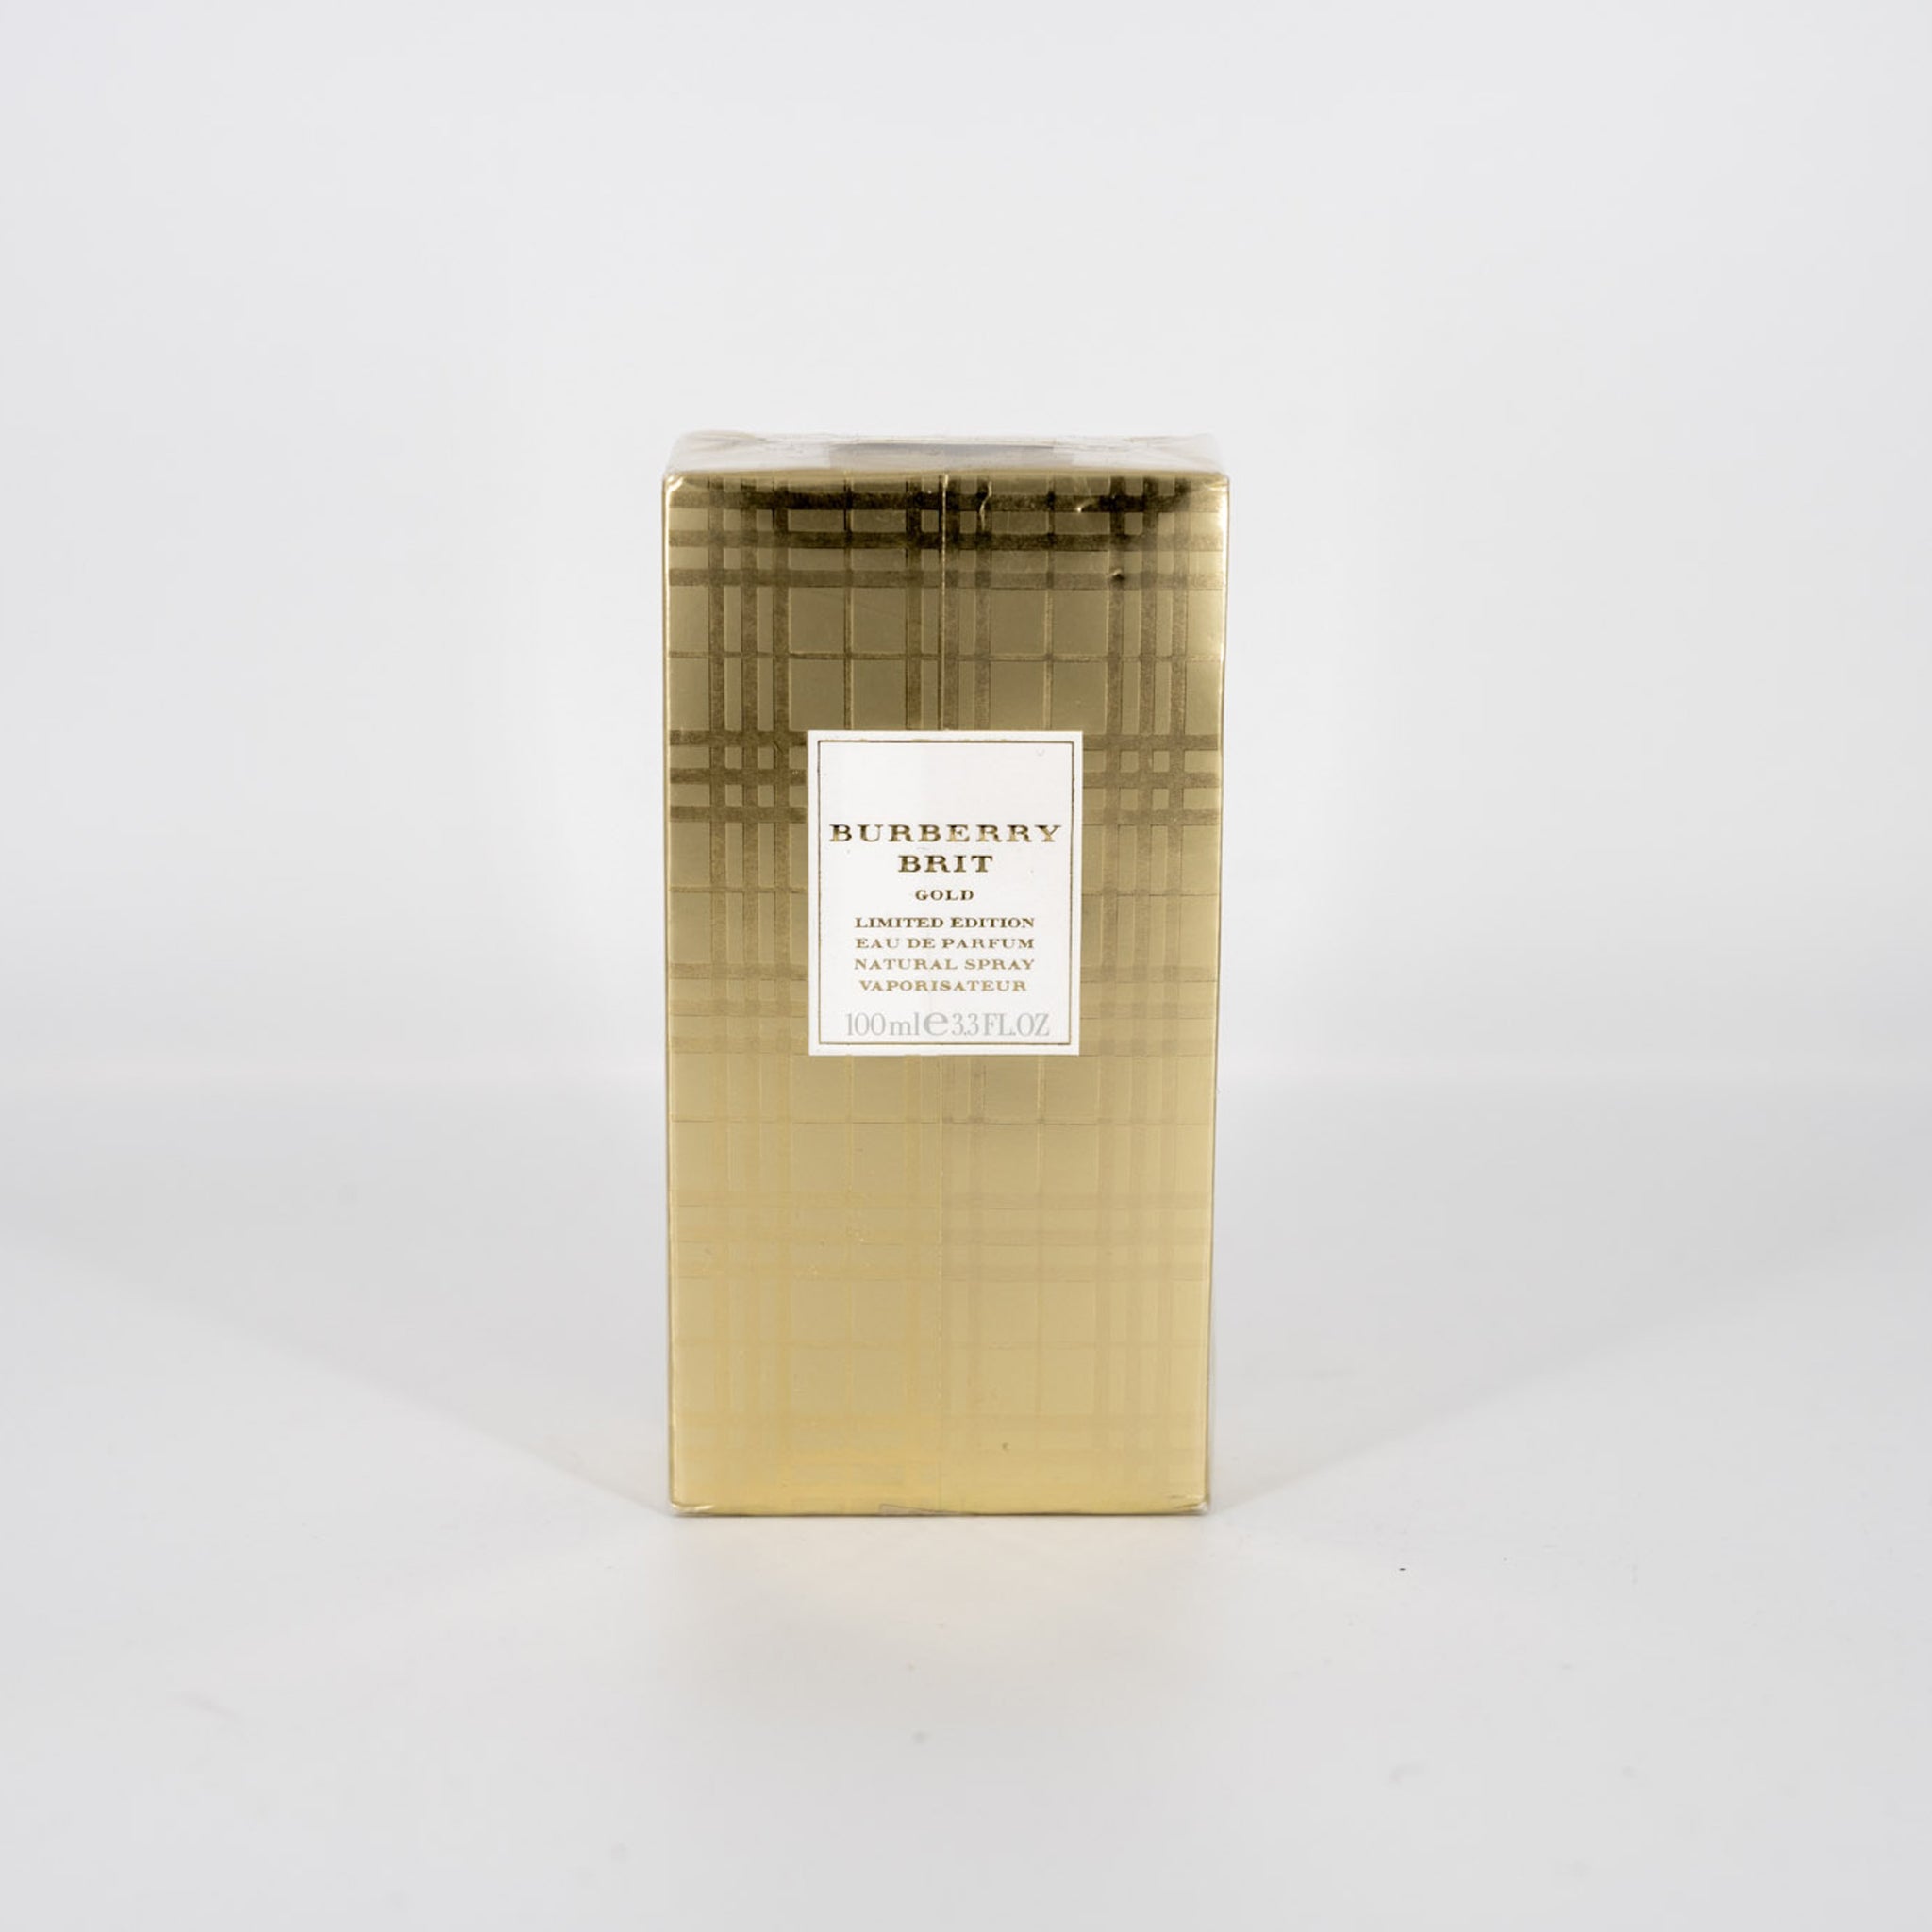 Burberry Brit Gold Edition Perfume by Burberry for EDP S –